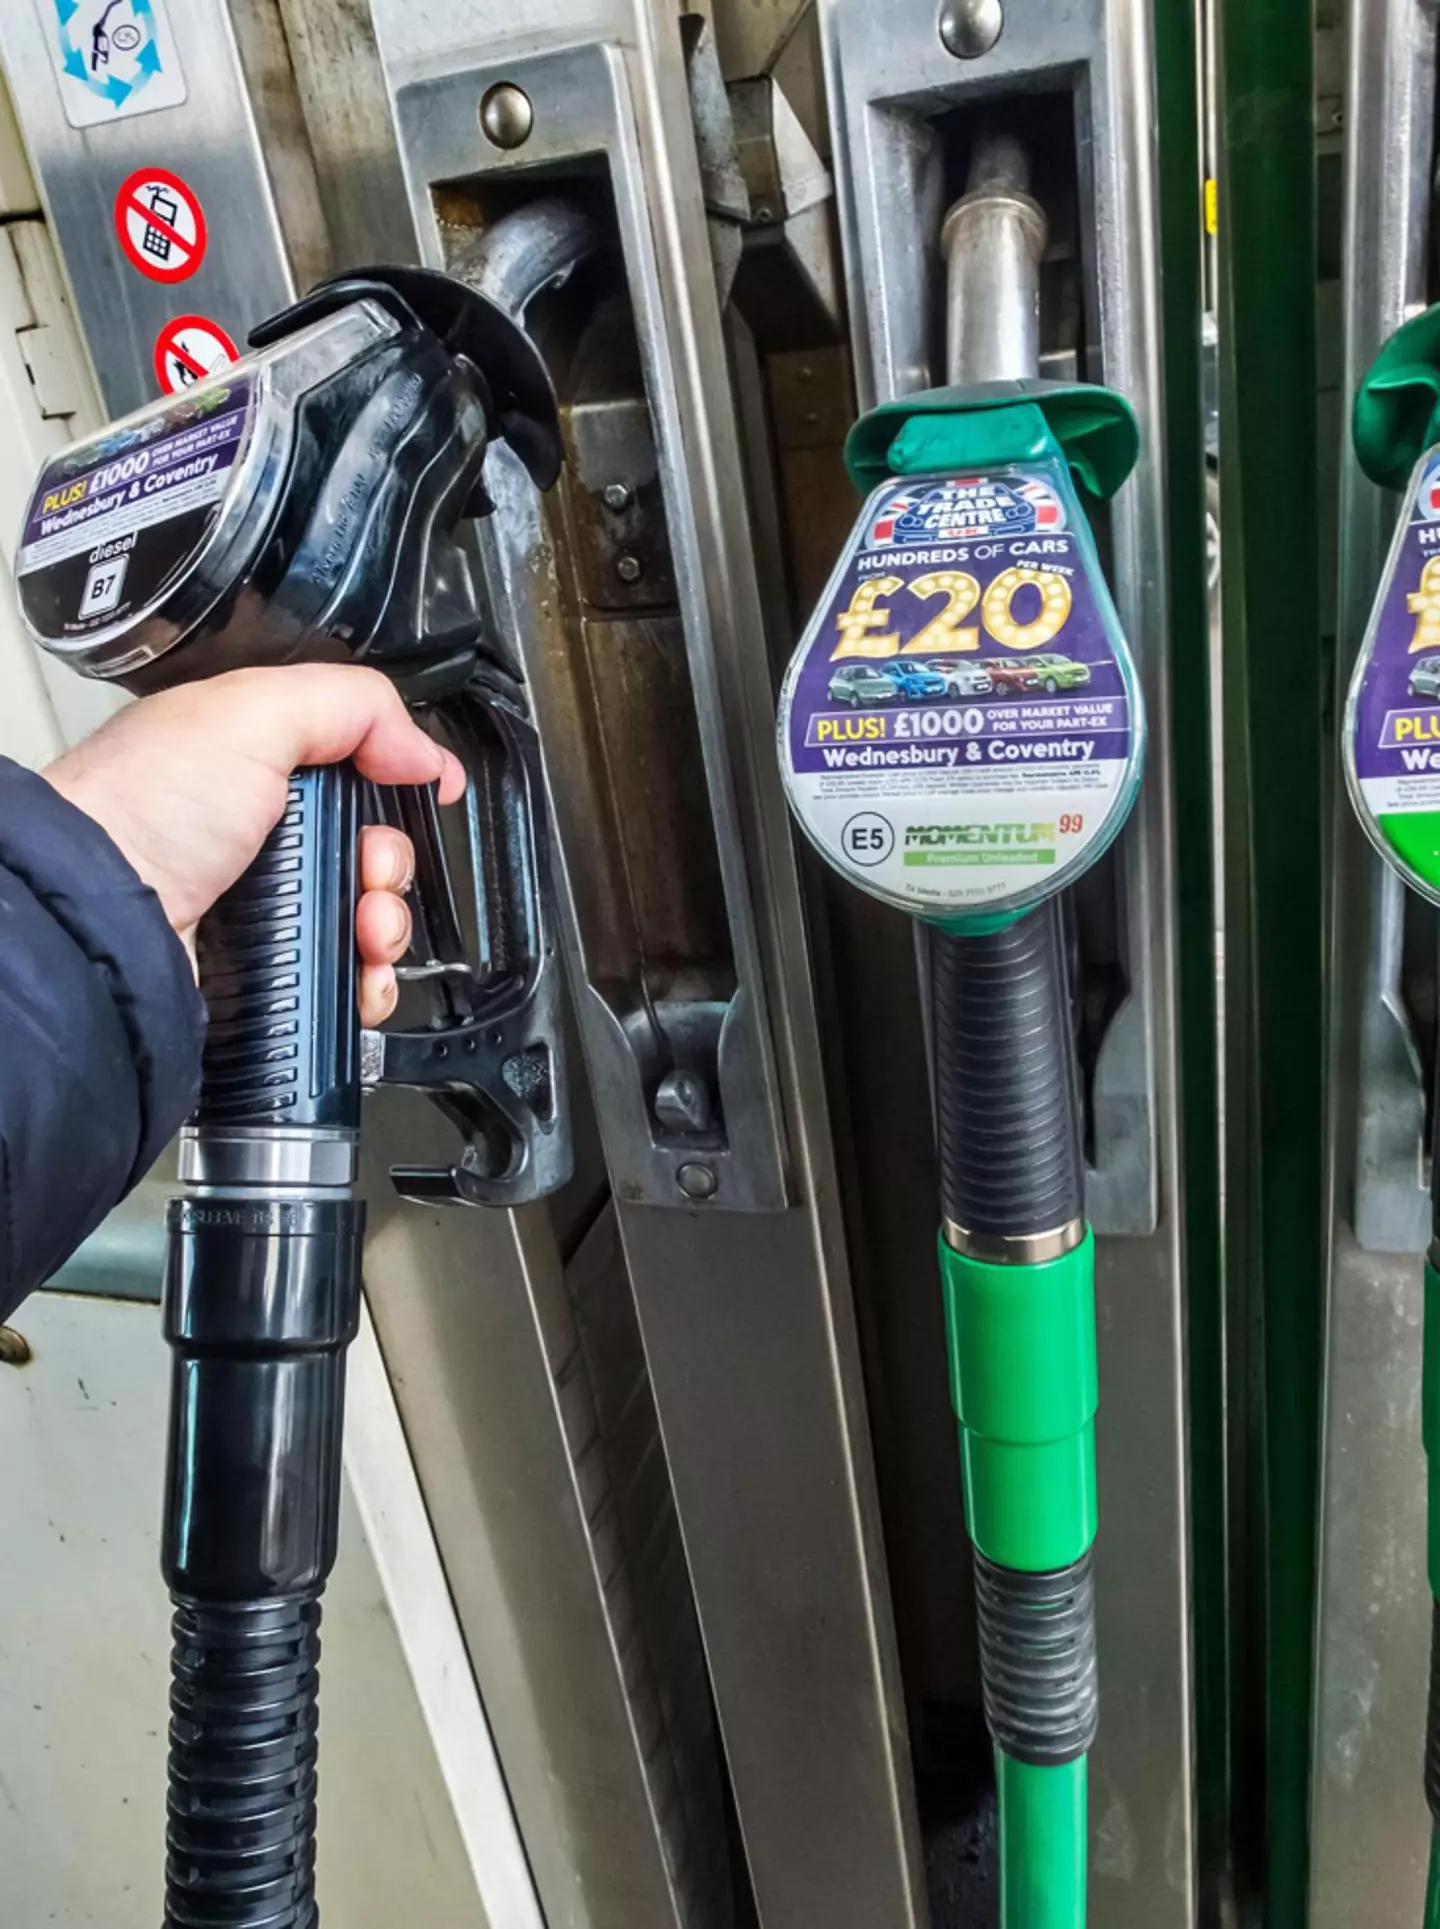 The warning came after one man tried to fill up three cans of petrol.